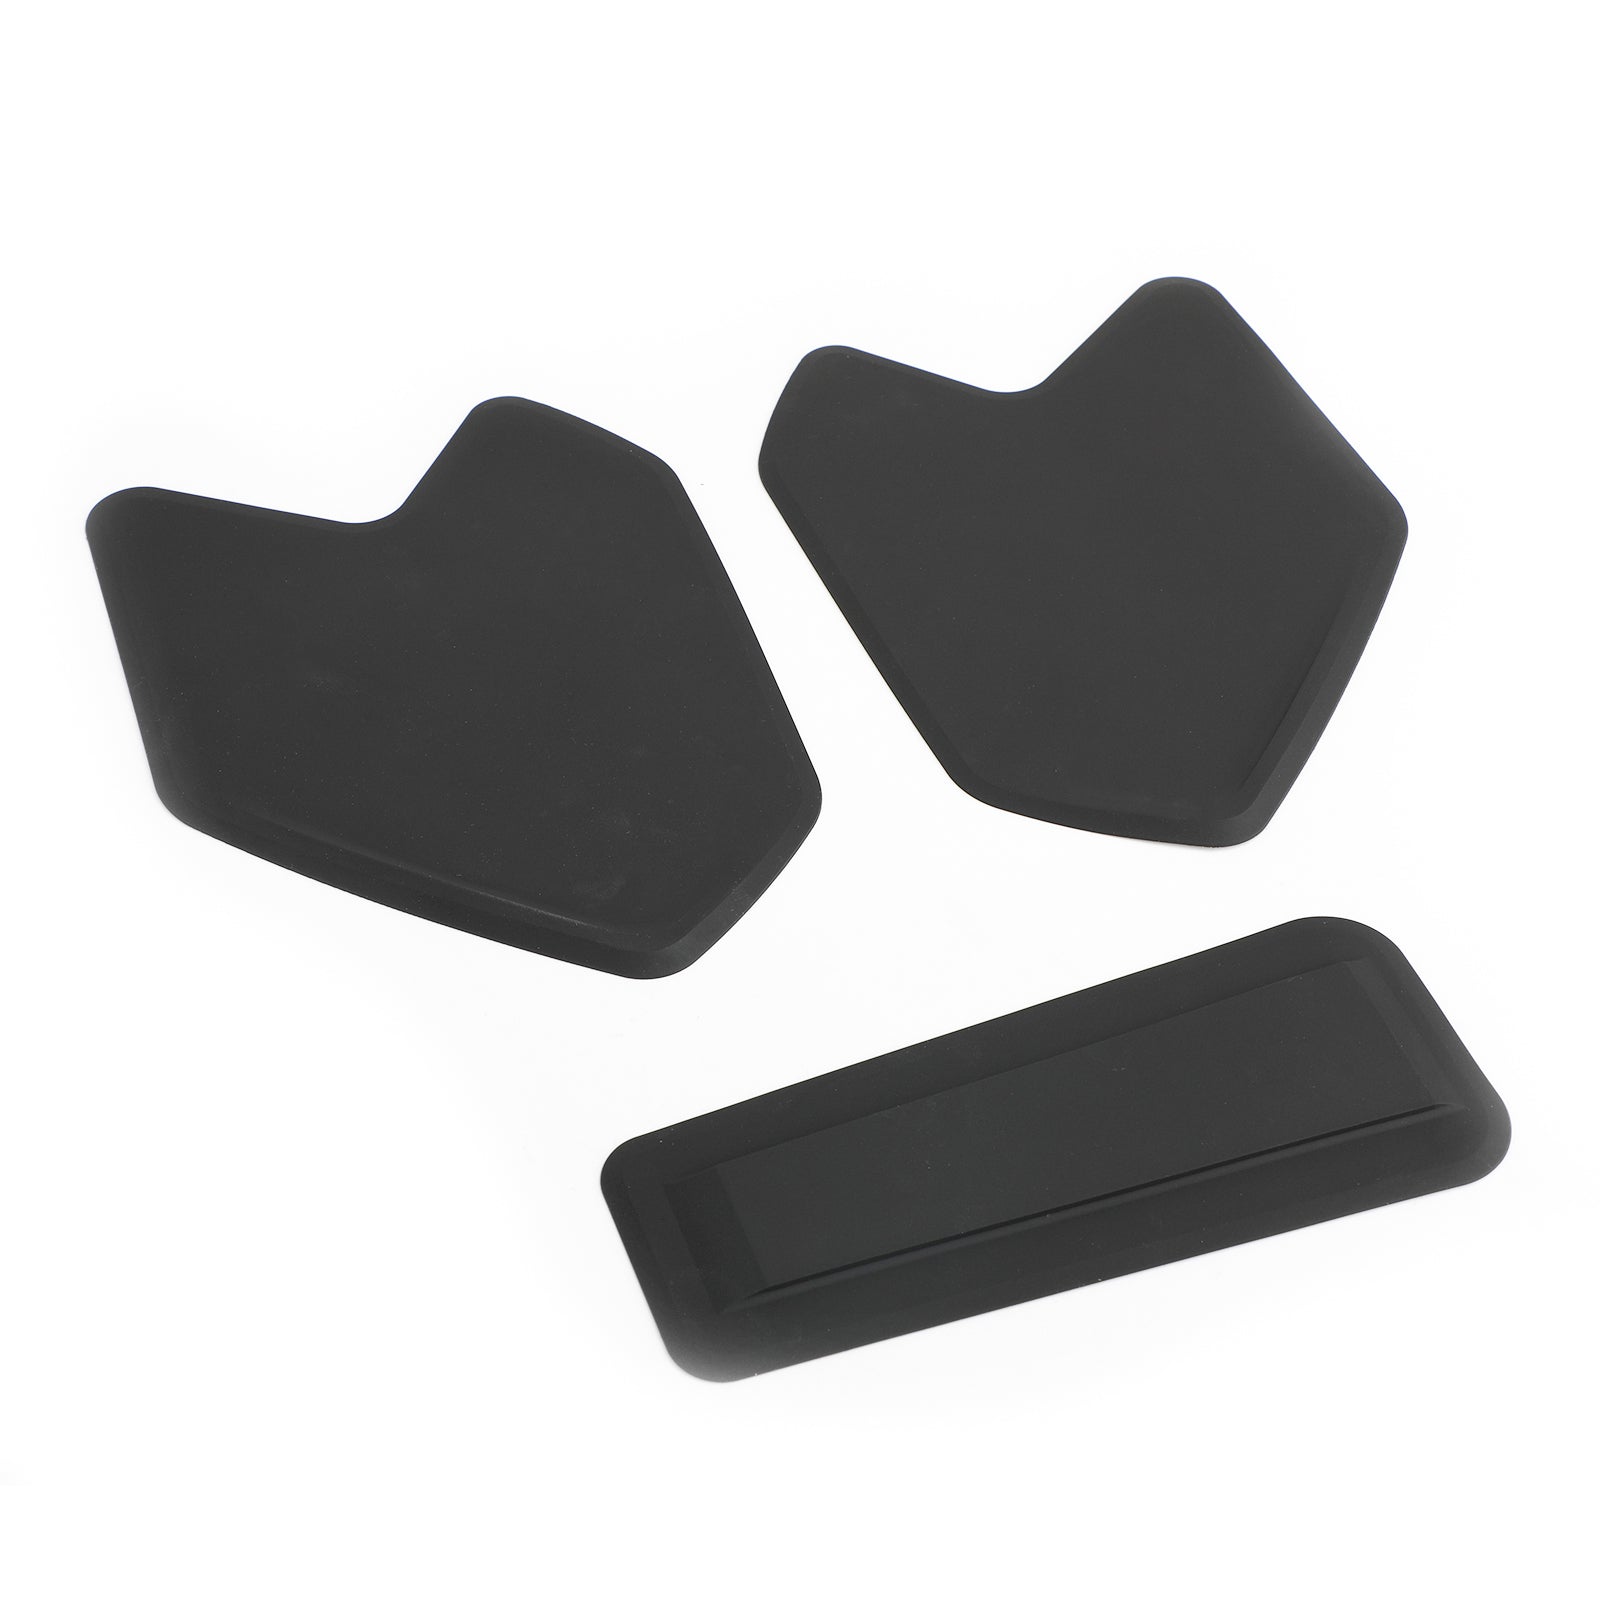 BMW R1200GS LC Adv 2008-2017 Side Tank Traction Grips Pads ProtectorVehicle Parts &amp; Accessories, Motorcycle Parts, Other Motorcycle Parts!